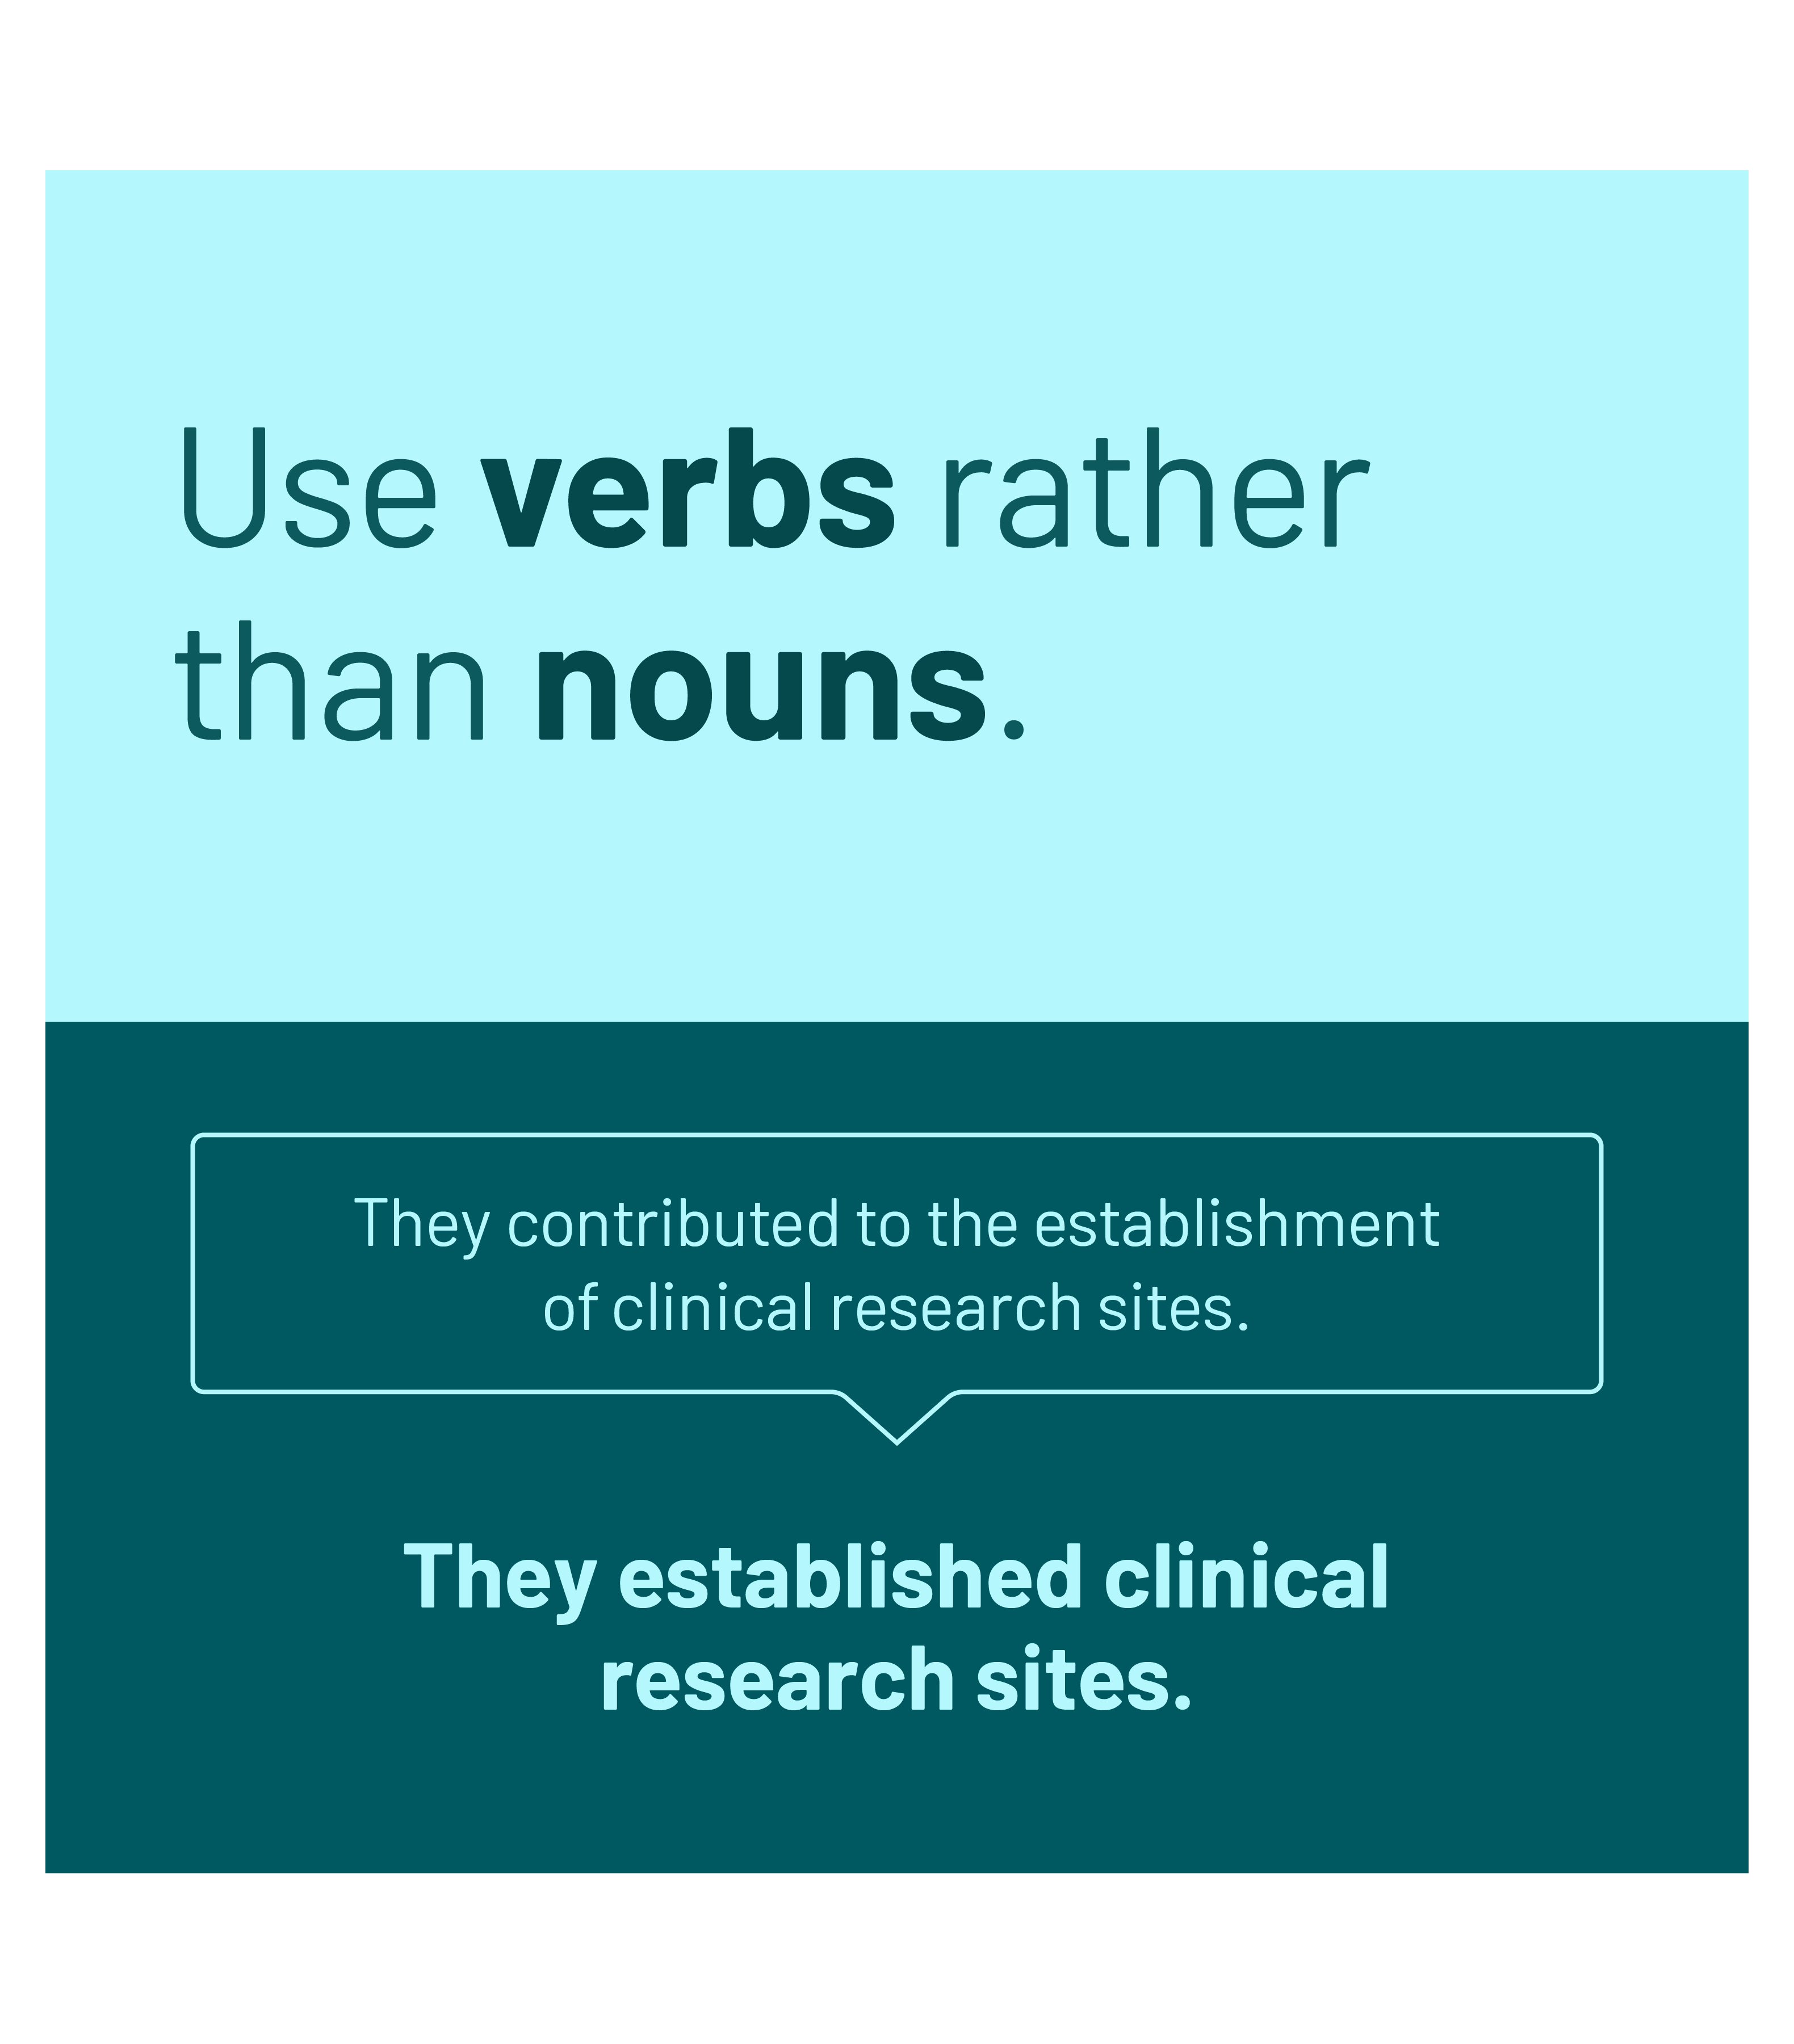 Use verbs rather than nouns, with example